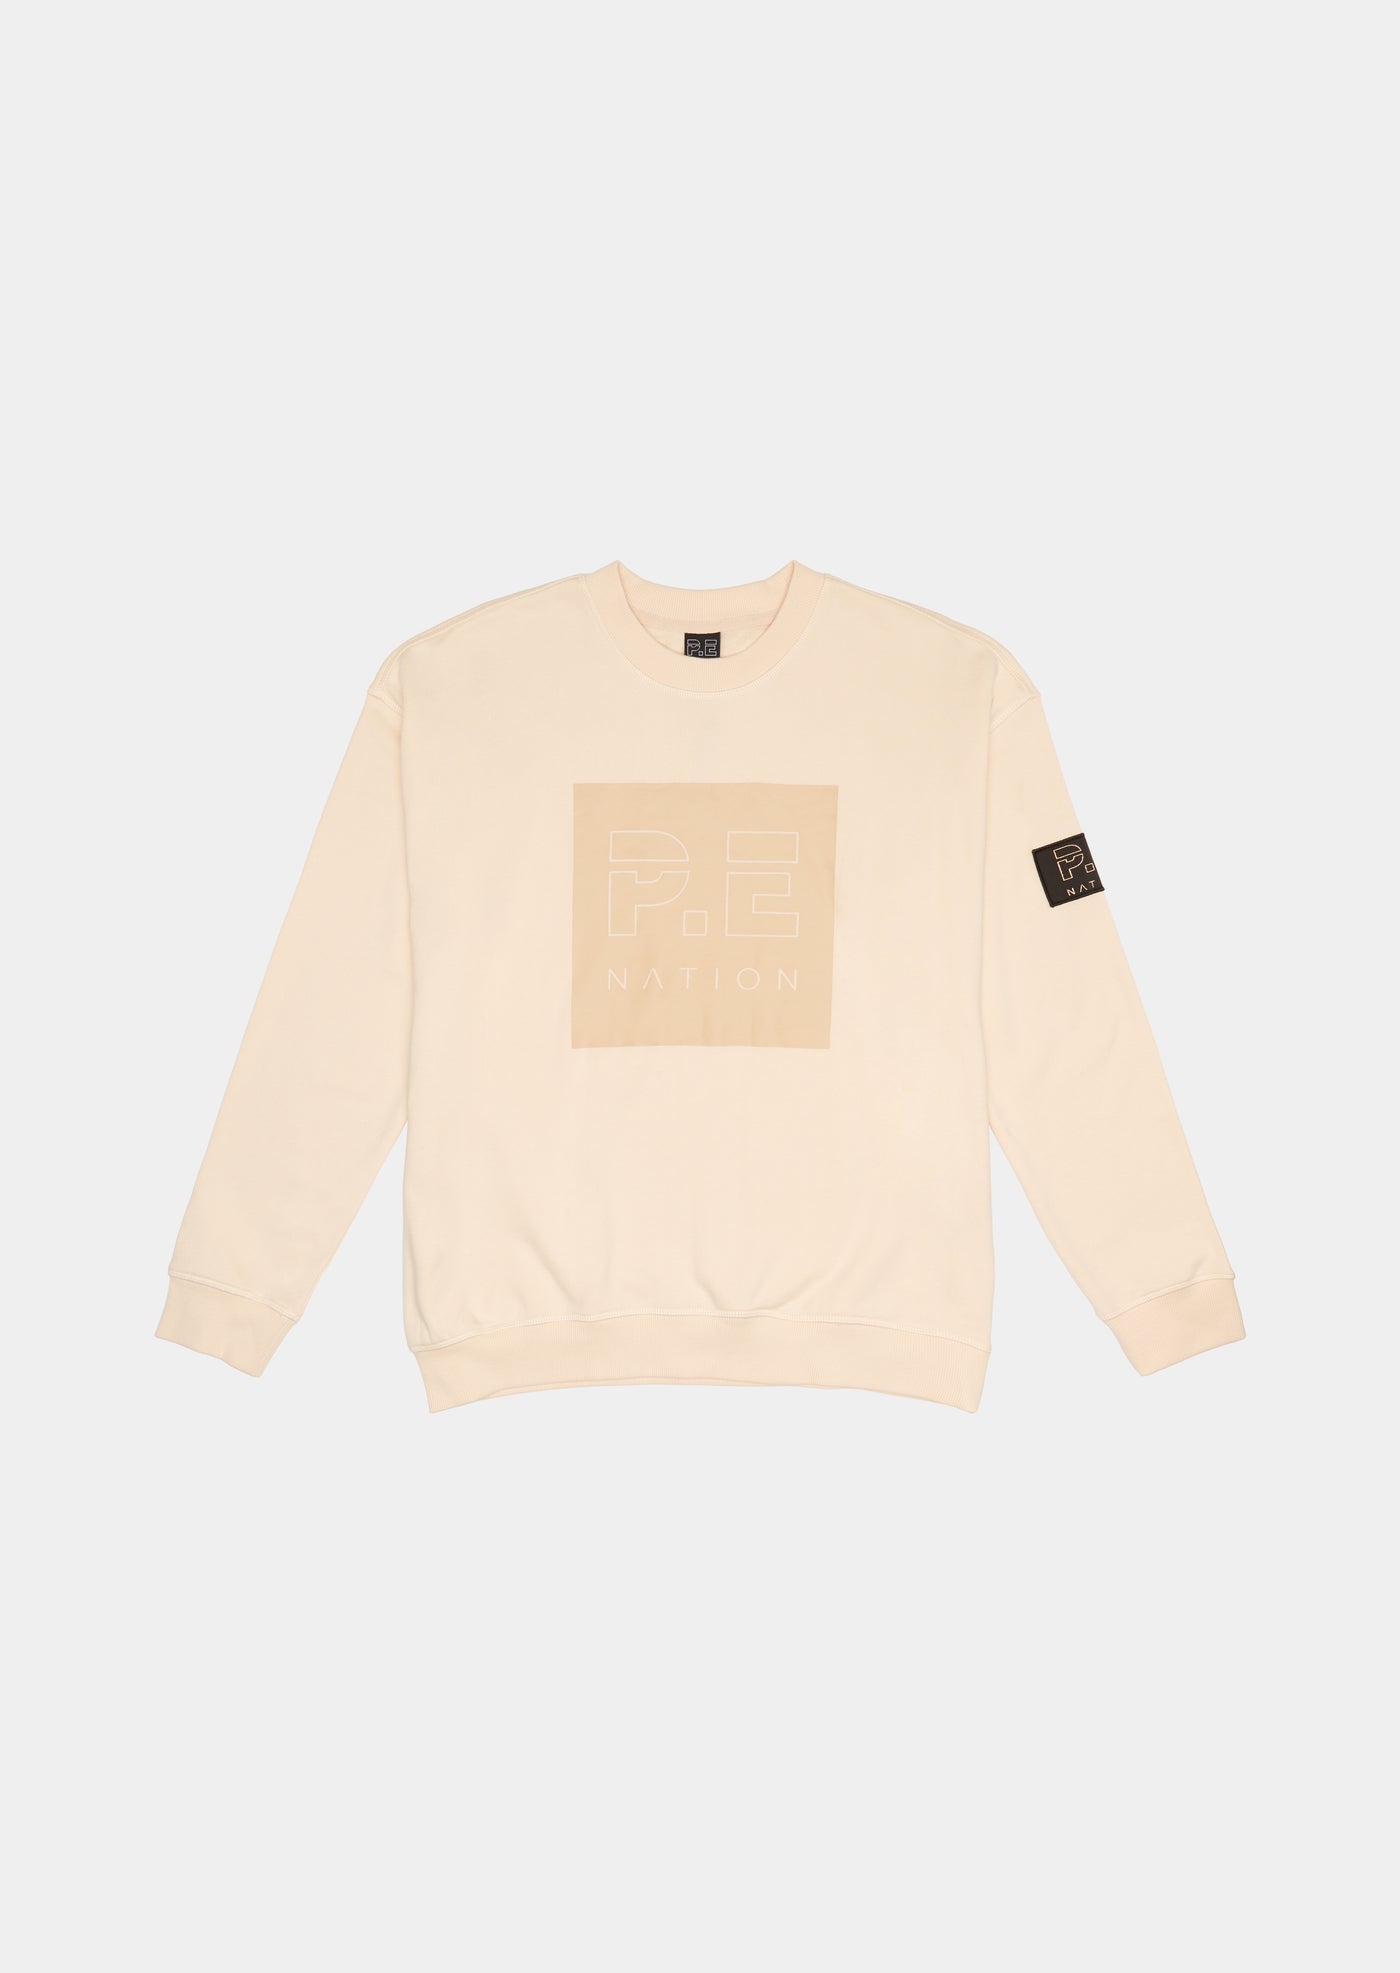 ARCADE SWEAT IN PEARLED IVORY